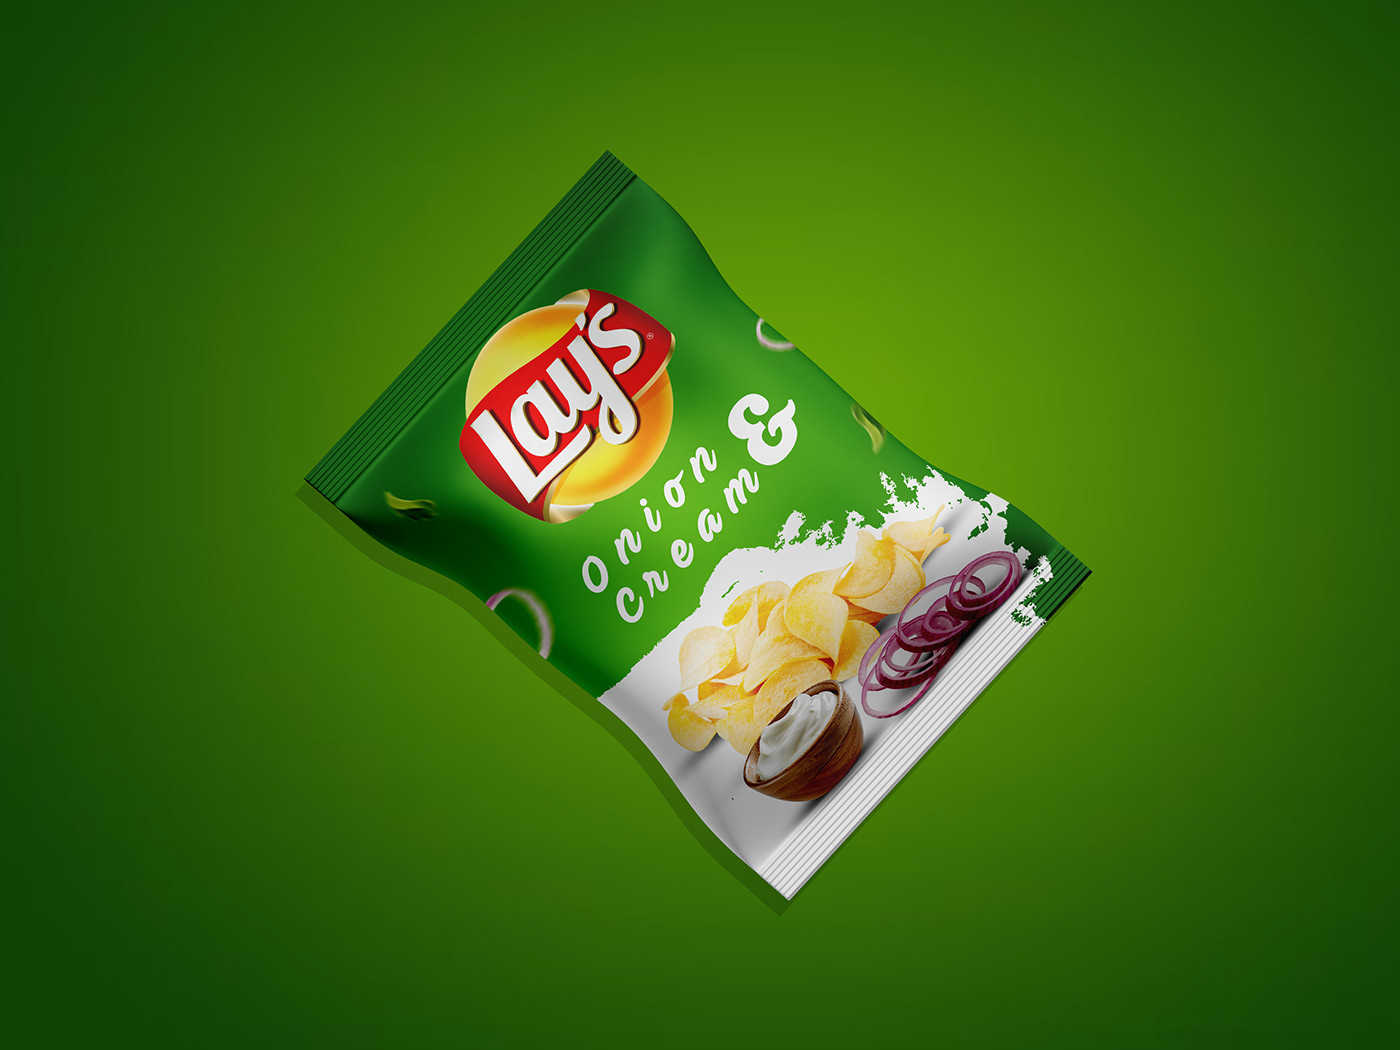 Lays chips CHIPS PACKAGING  Chips Packet Design mokeup Packging packaging design branding  design marketing   Brand Design